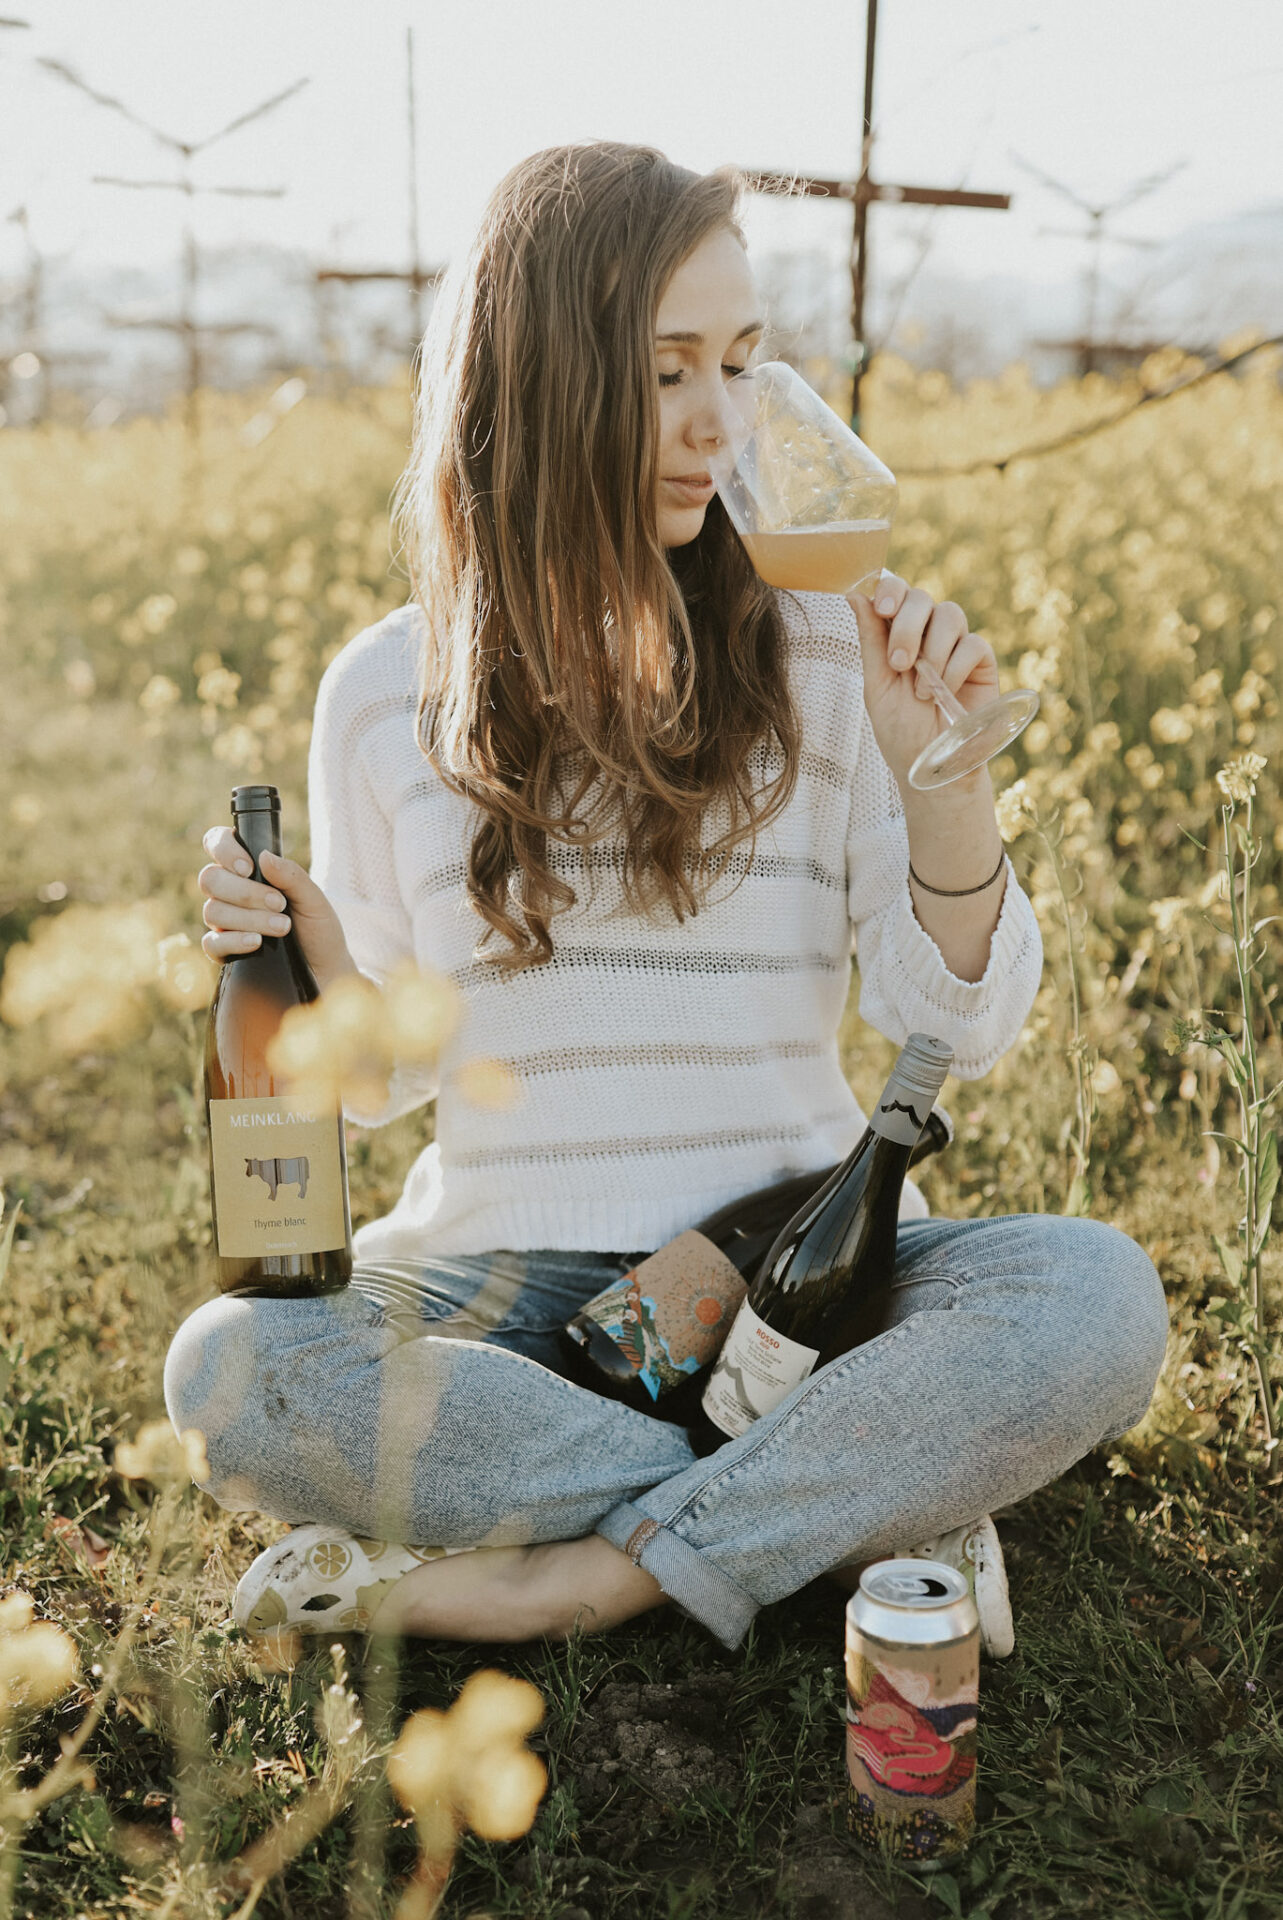 Paige in a field of yellow flowers sipping Pinot Grigio